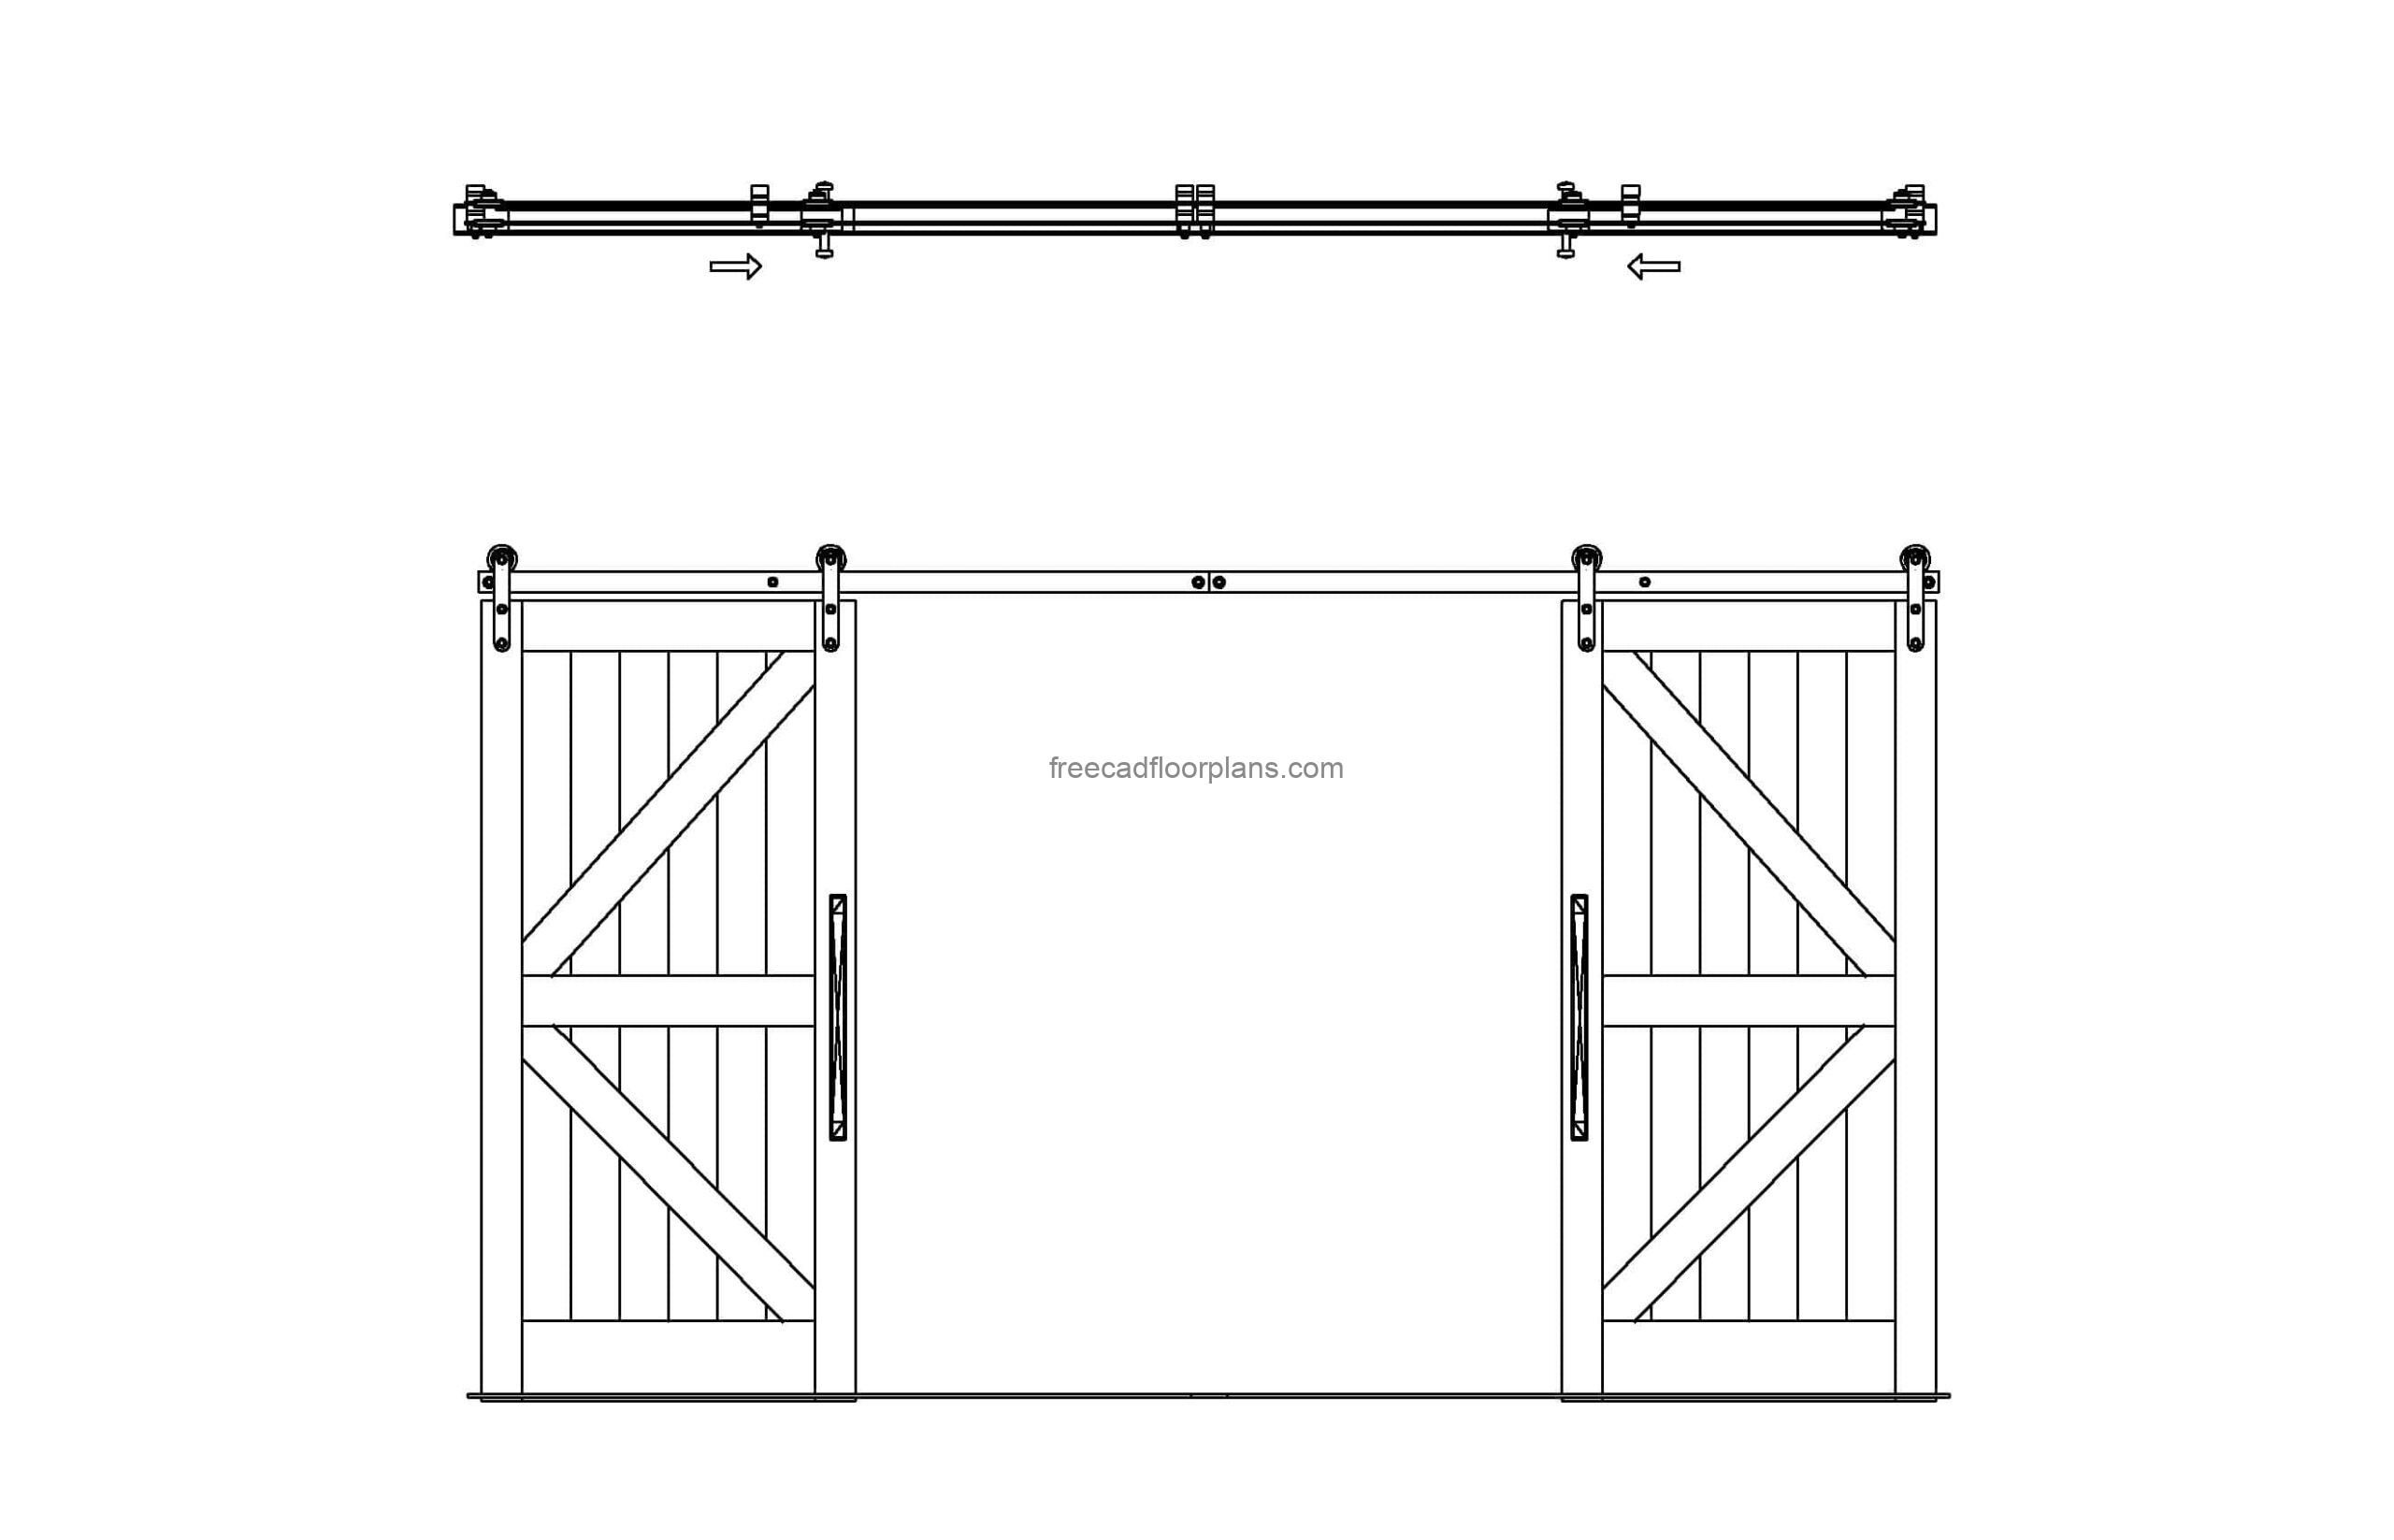 autocad drawing of a sliding barn doors, plan and front elevation 2d views, dwg file free for download